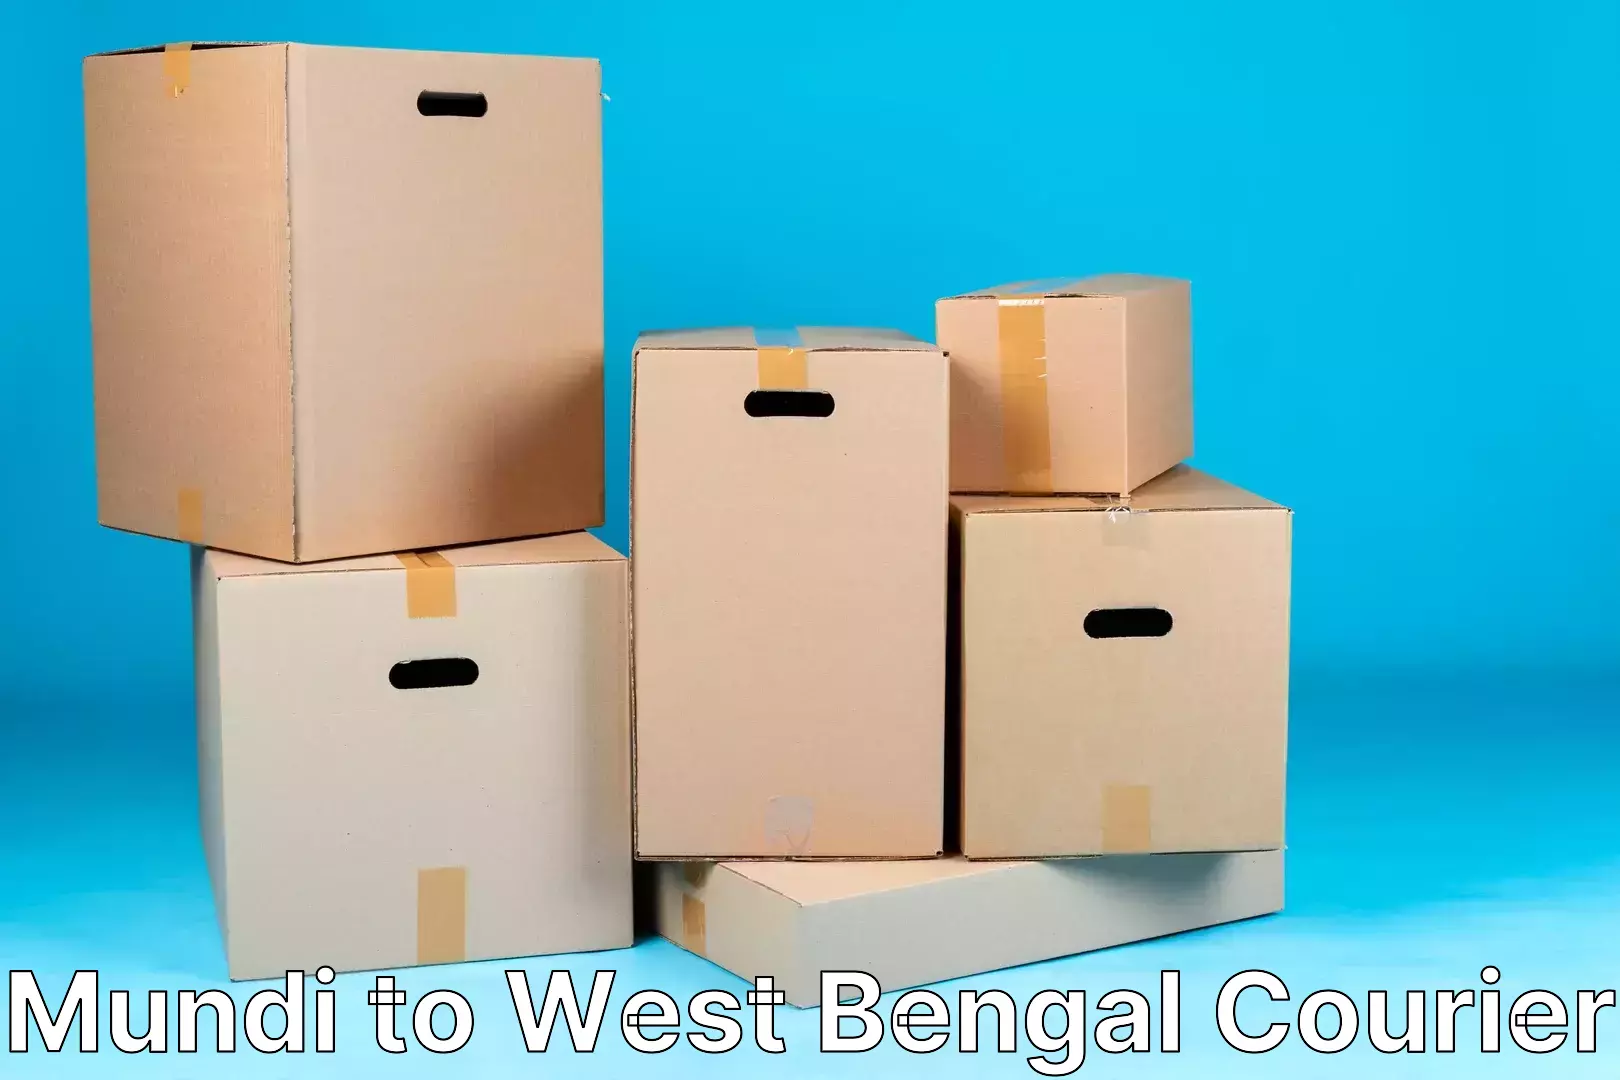 Next-day freight services Mundi to West Bengal